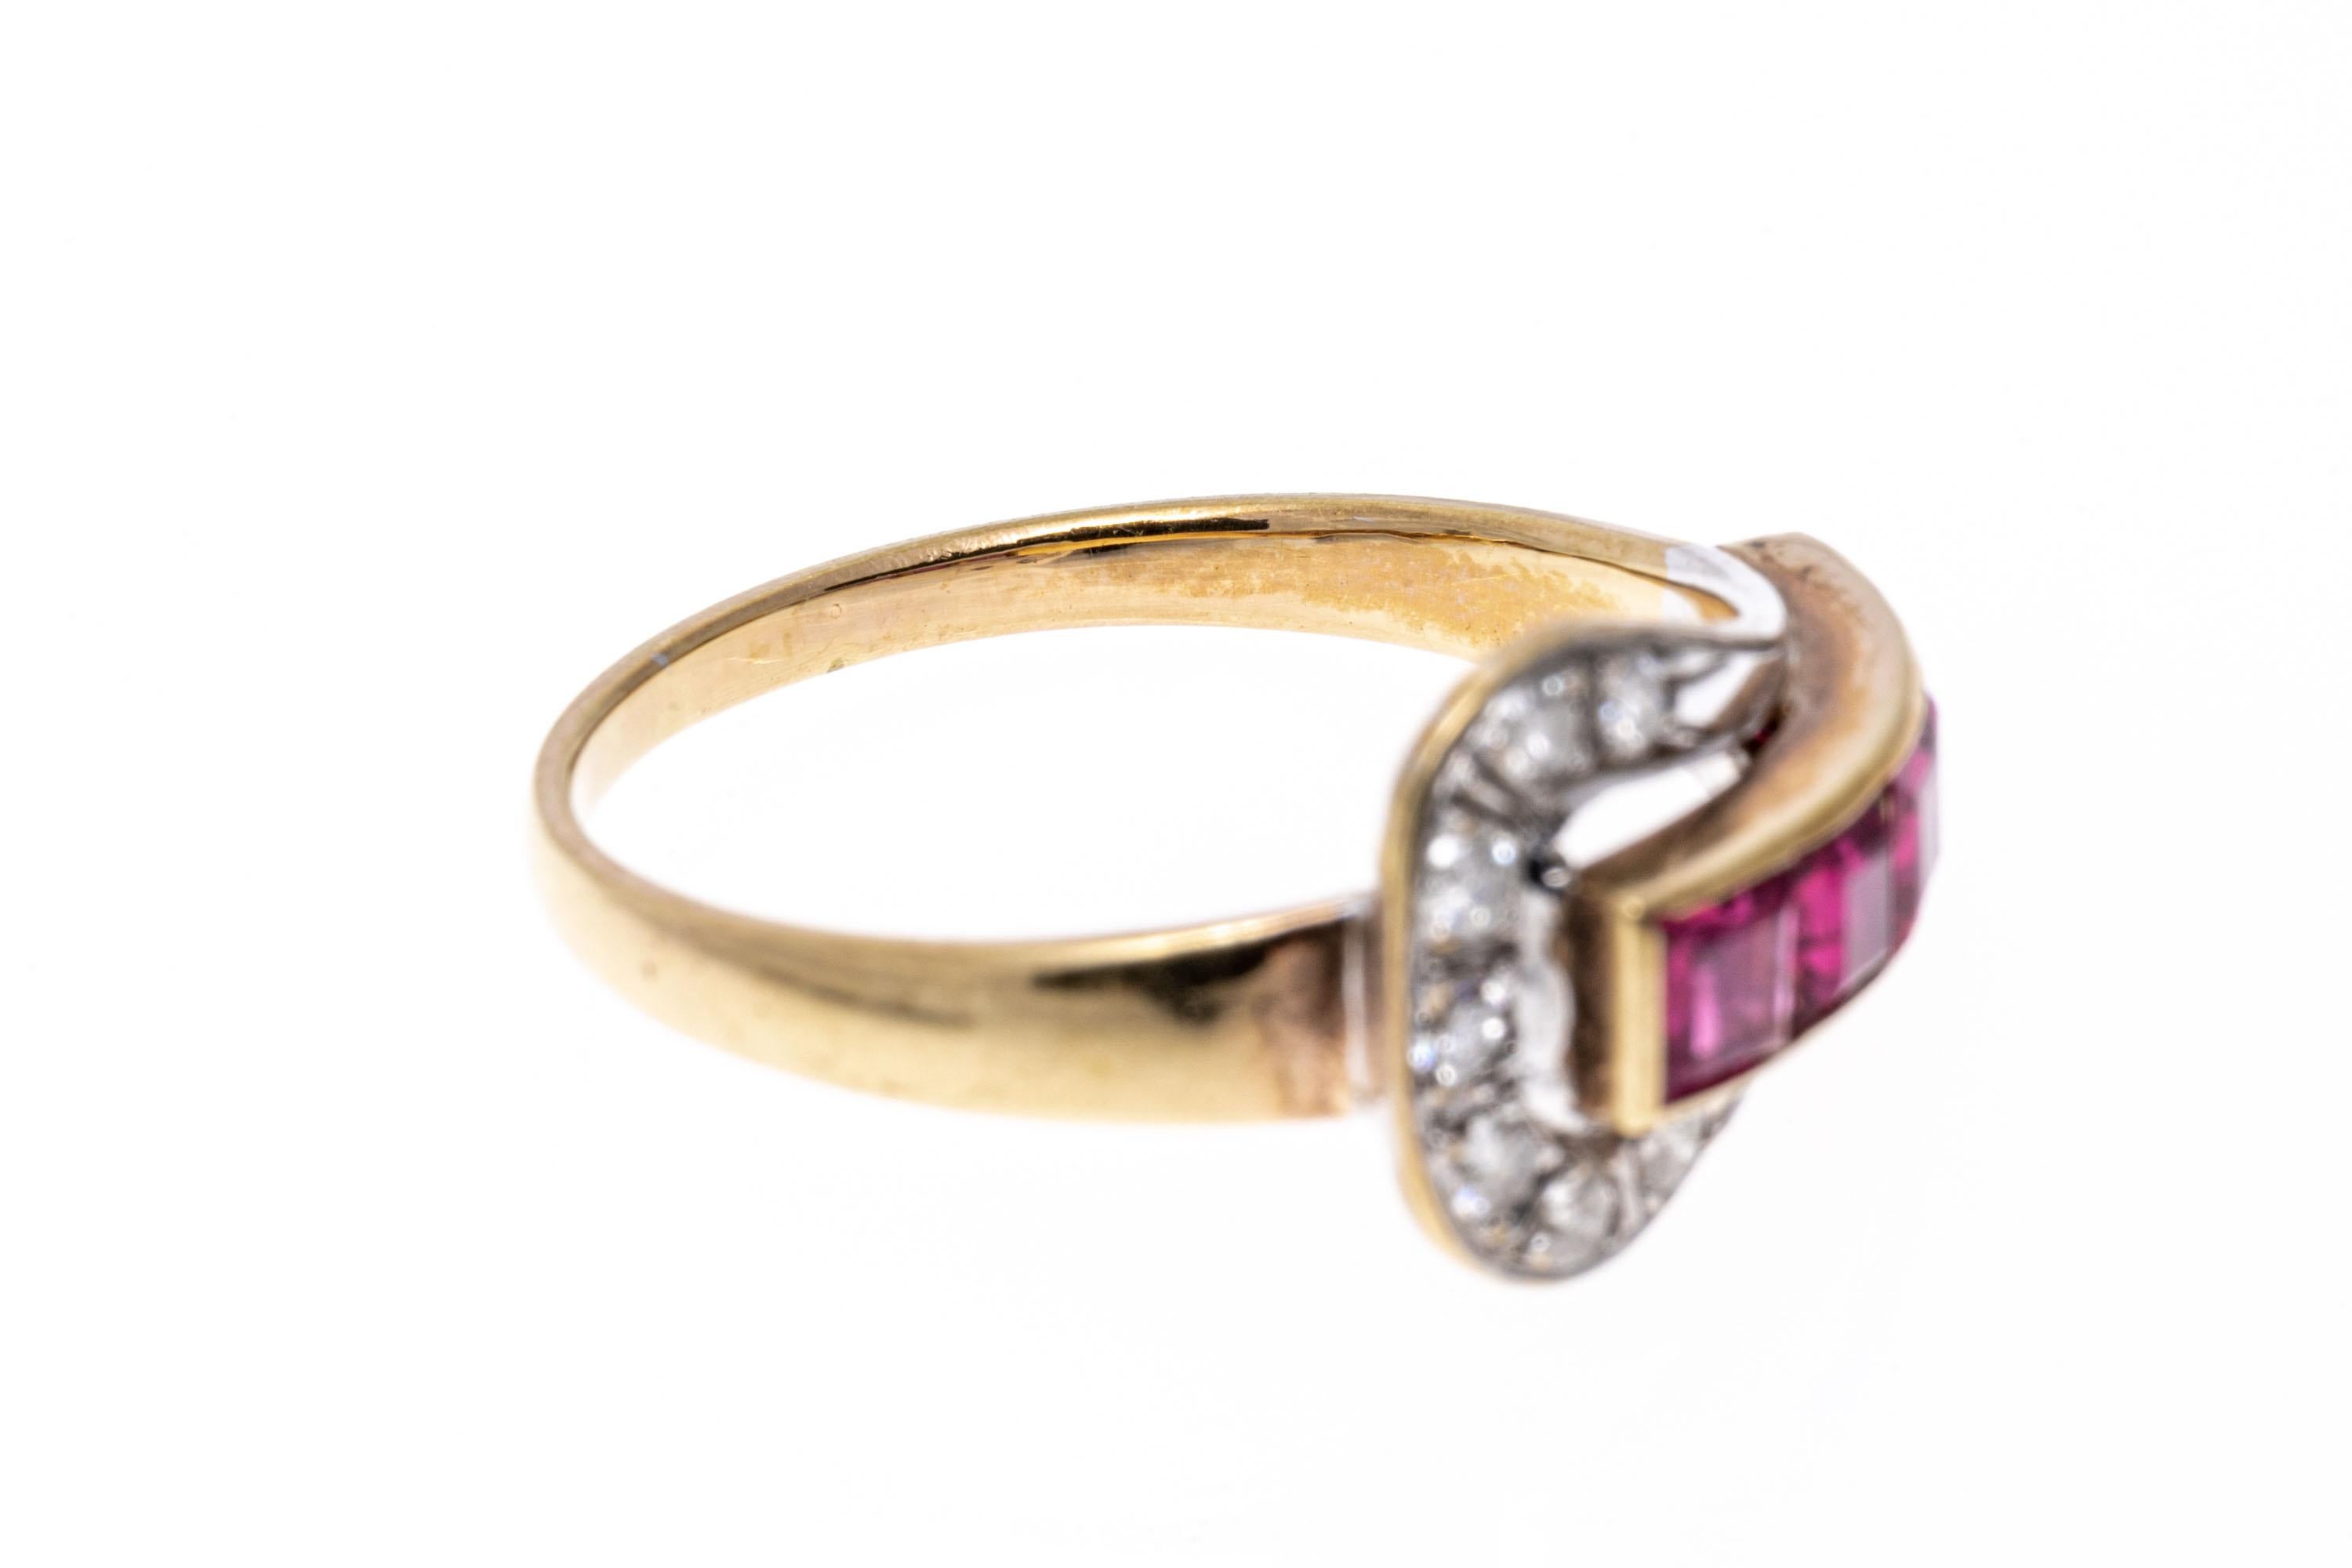 14k yellow gold ring. This yellow gold vintage ring is a retro buckle style, set with a row of square faceted, reddish pink rubies, approximately 1.25 TCW, channel set, and adorned with a yellow gold buckle set with round faceted diamonds,